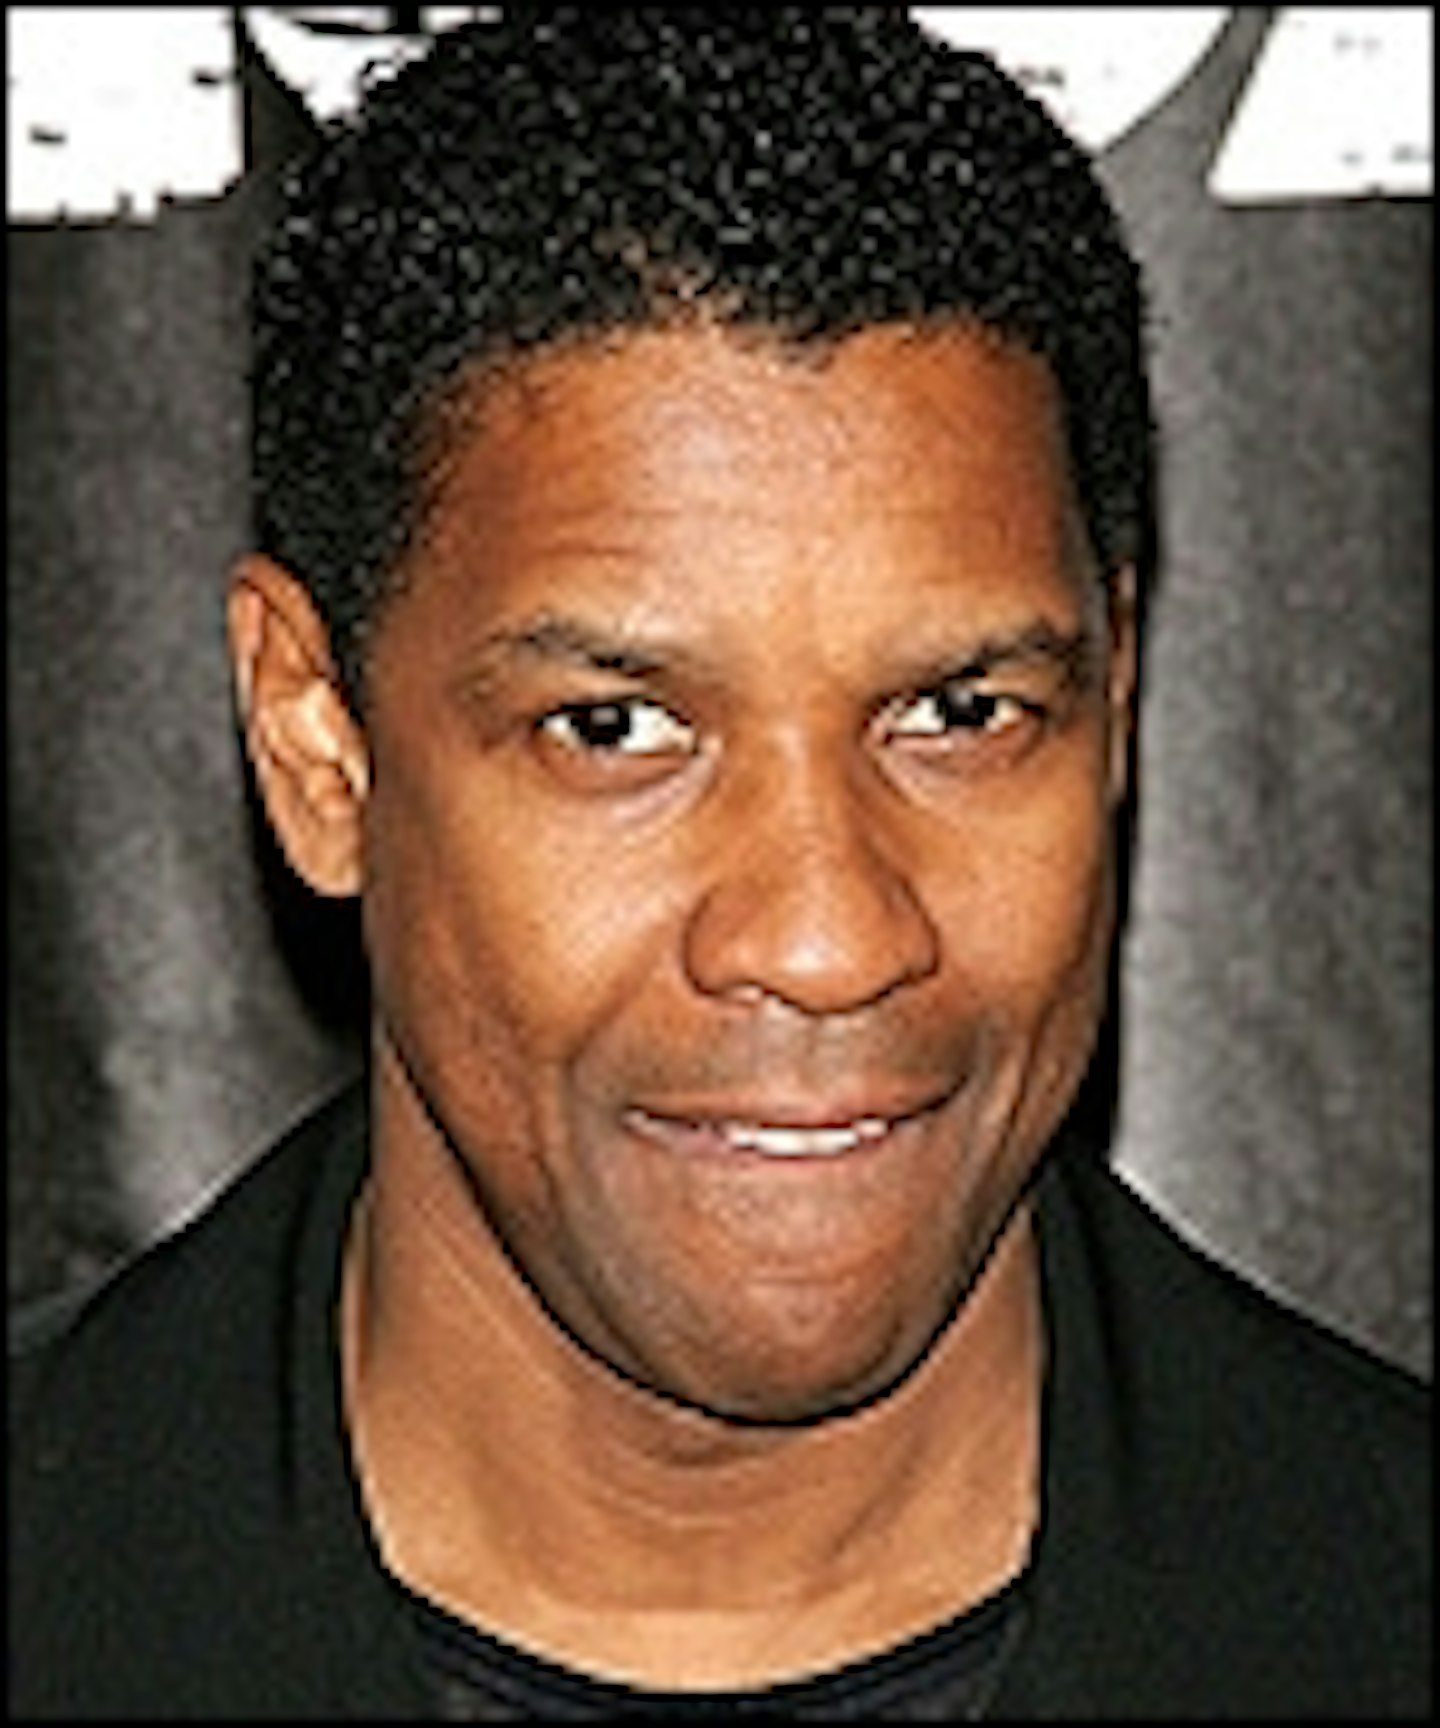 Denzel's Unstoppable May Have Stopped